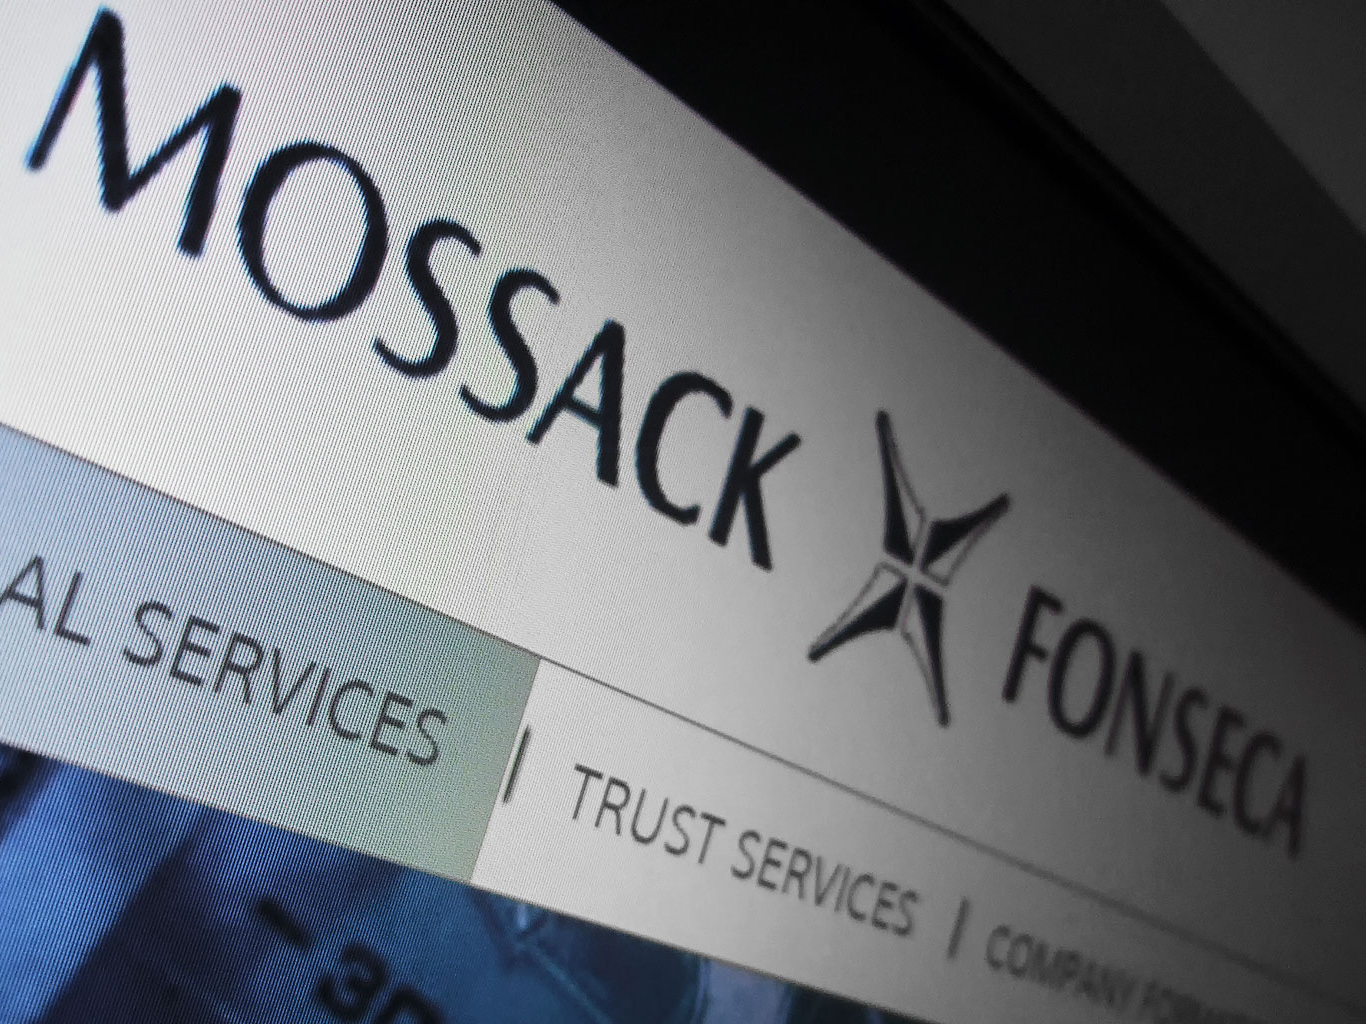 Mossack Fonseca Image Moscow Live Flickr